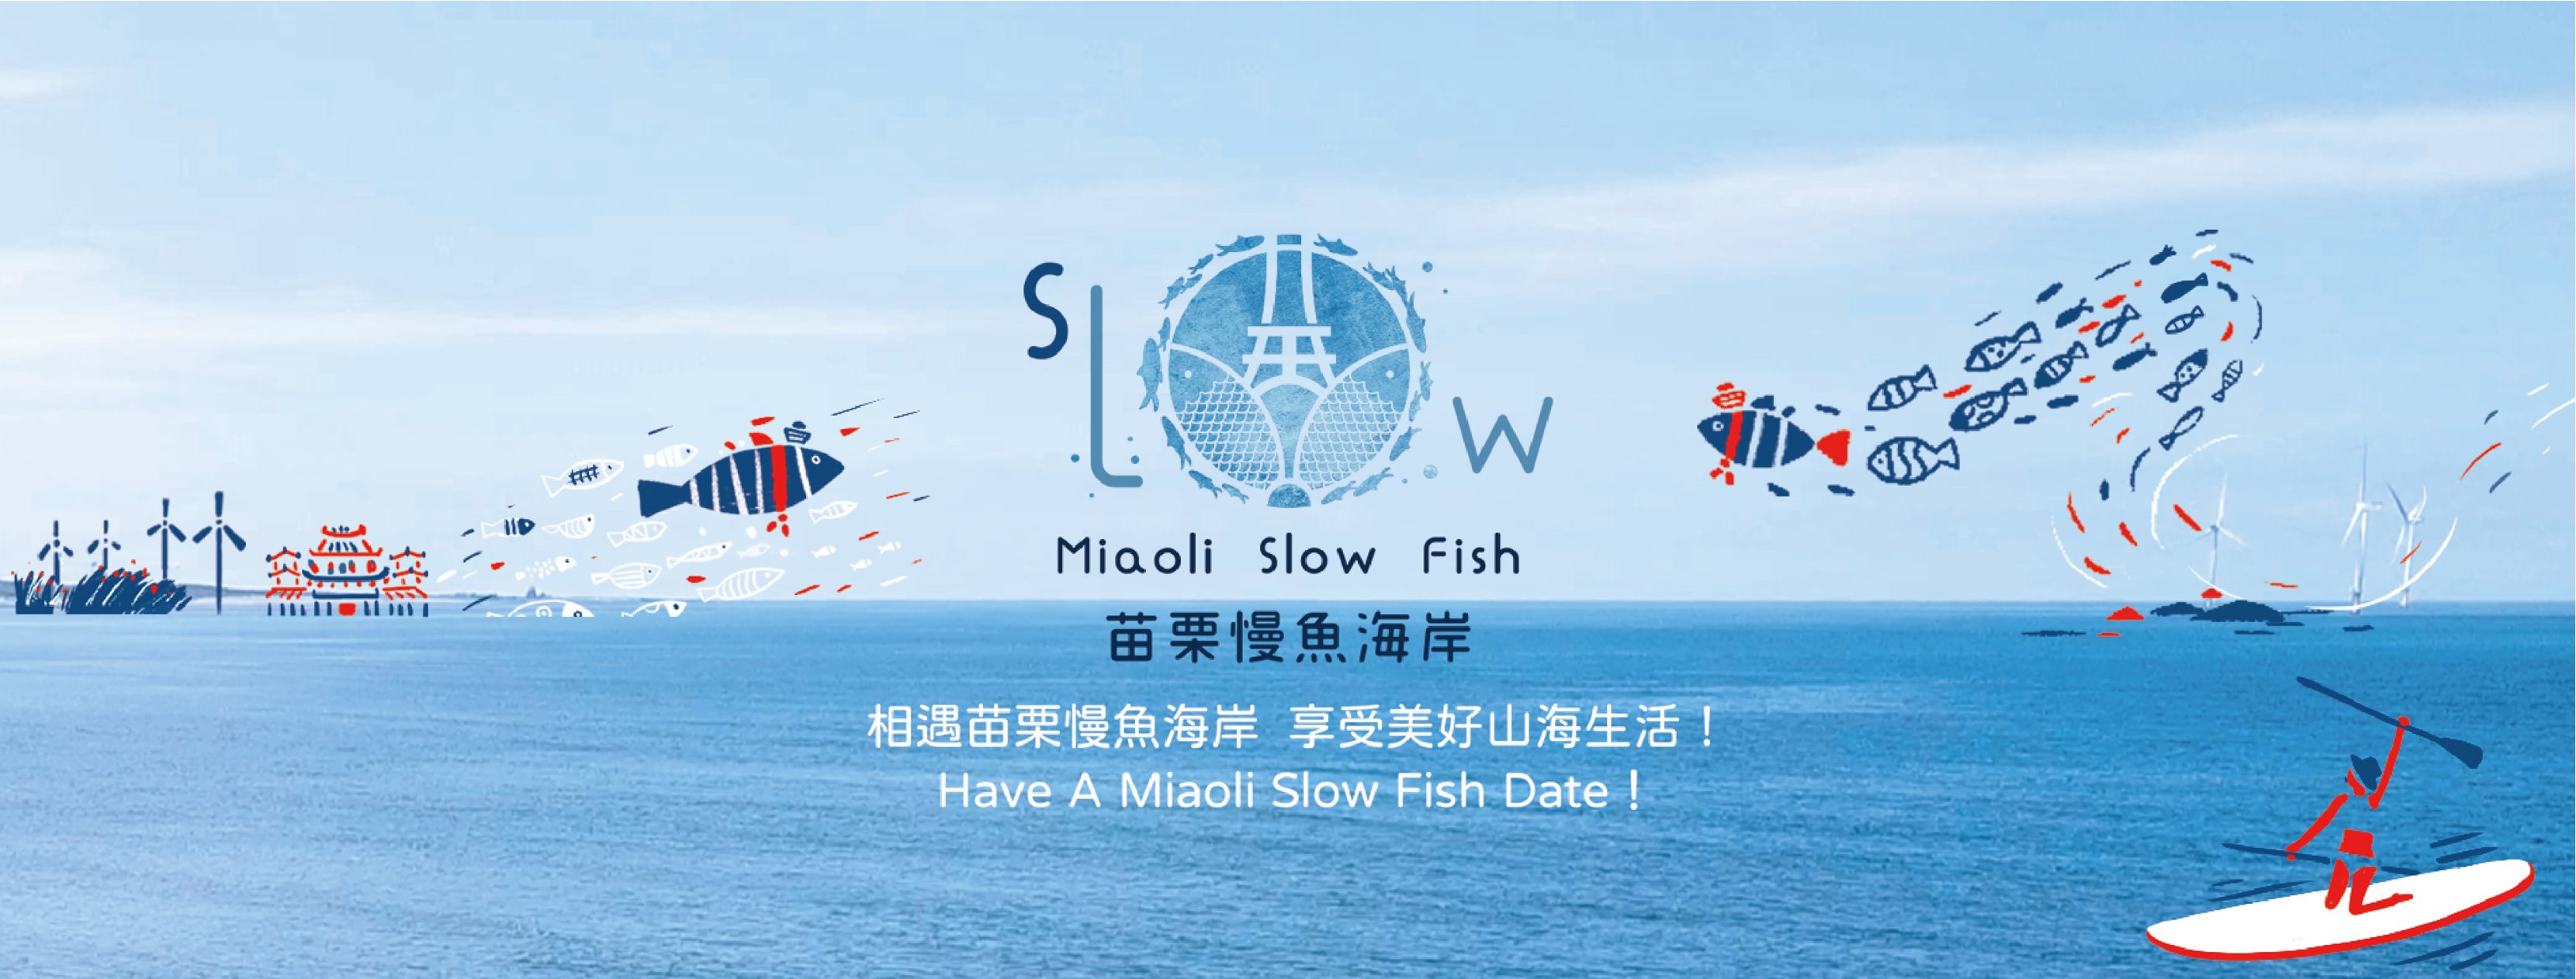 “2021 Slow Fish Sightseeing Season” launches a series of activities. (Photo / Provided by Miaoli County Government)